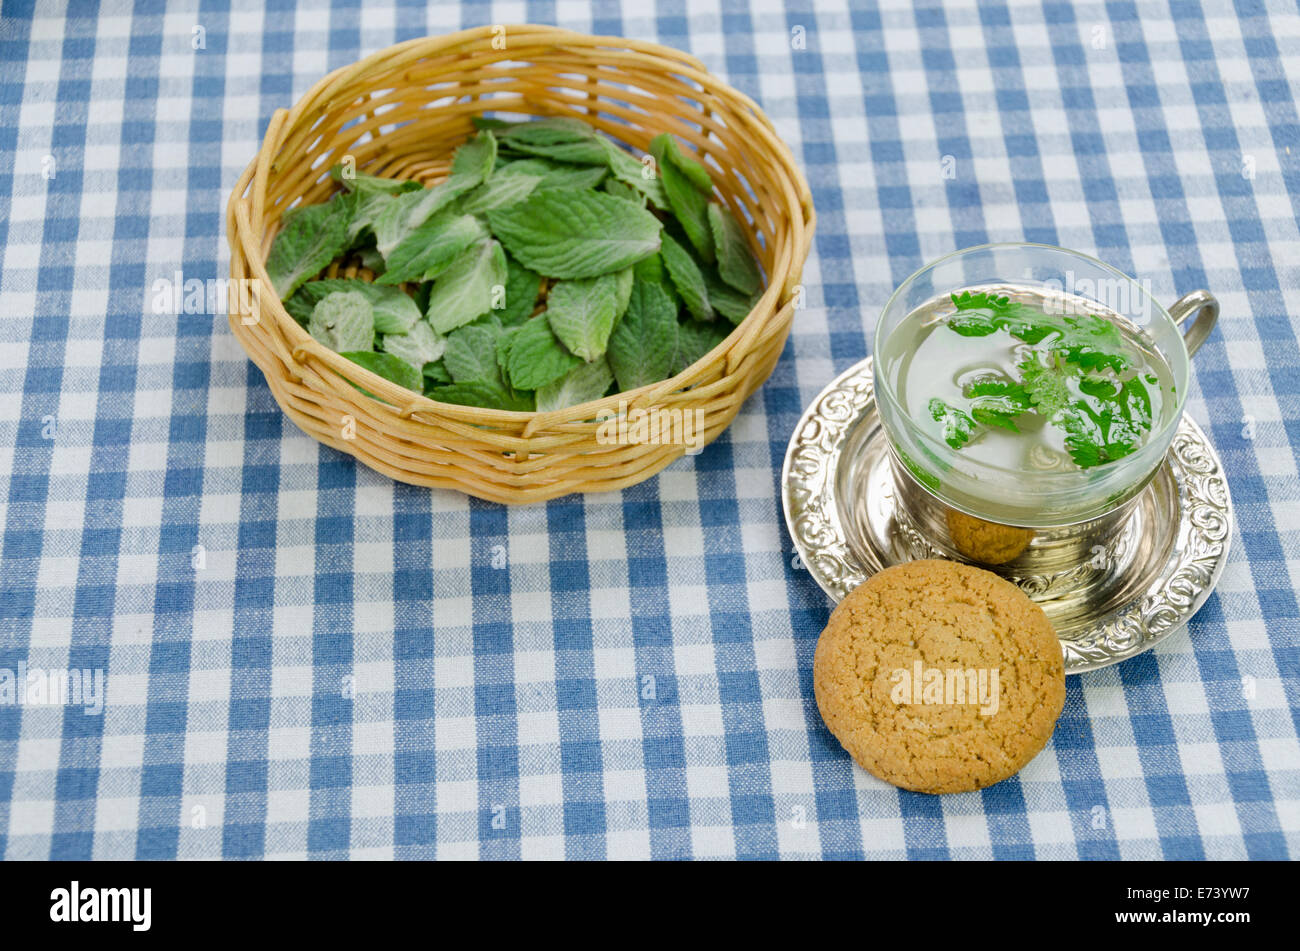 fresh healthy mint tea prepared in cup and dietary oatmeal cookie on checkered tablecloth Stock Photo